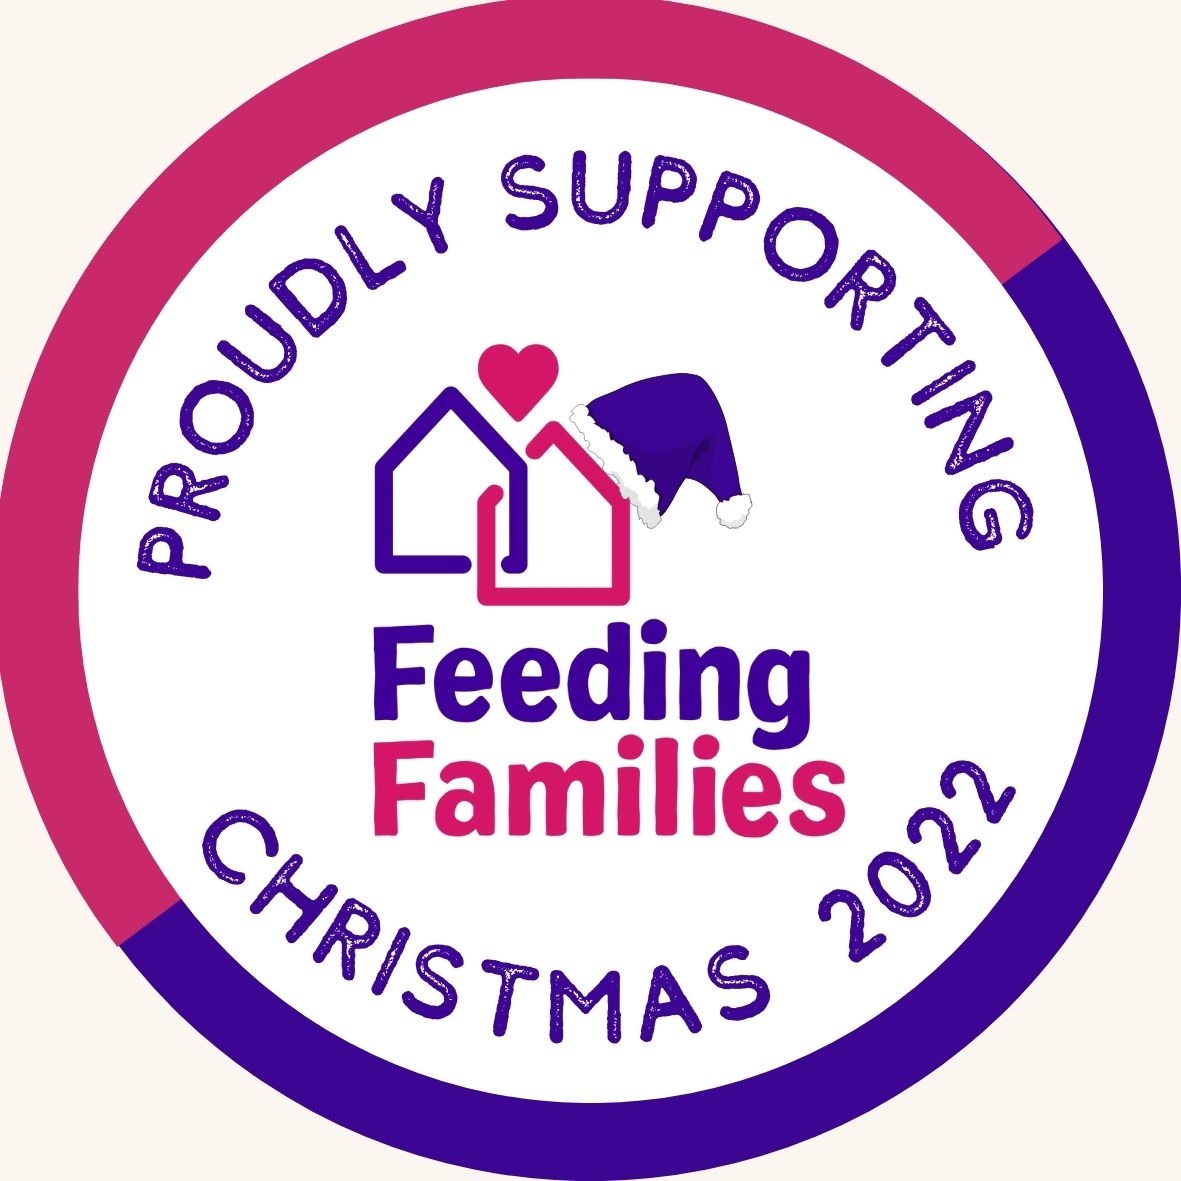 With a record number of #NorthEast families expected to rely on the support of @feedingfamilie1 this Christmas, we are proud to be supporting their Christmas appeal for emergency food boxes #FoodPoverty #CostOfLivingCrisis #GivingBack #CSR #MakeADifference #TisTheSeasonForGiving